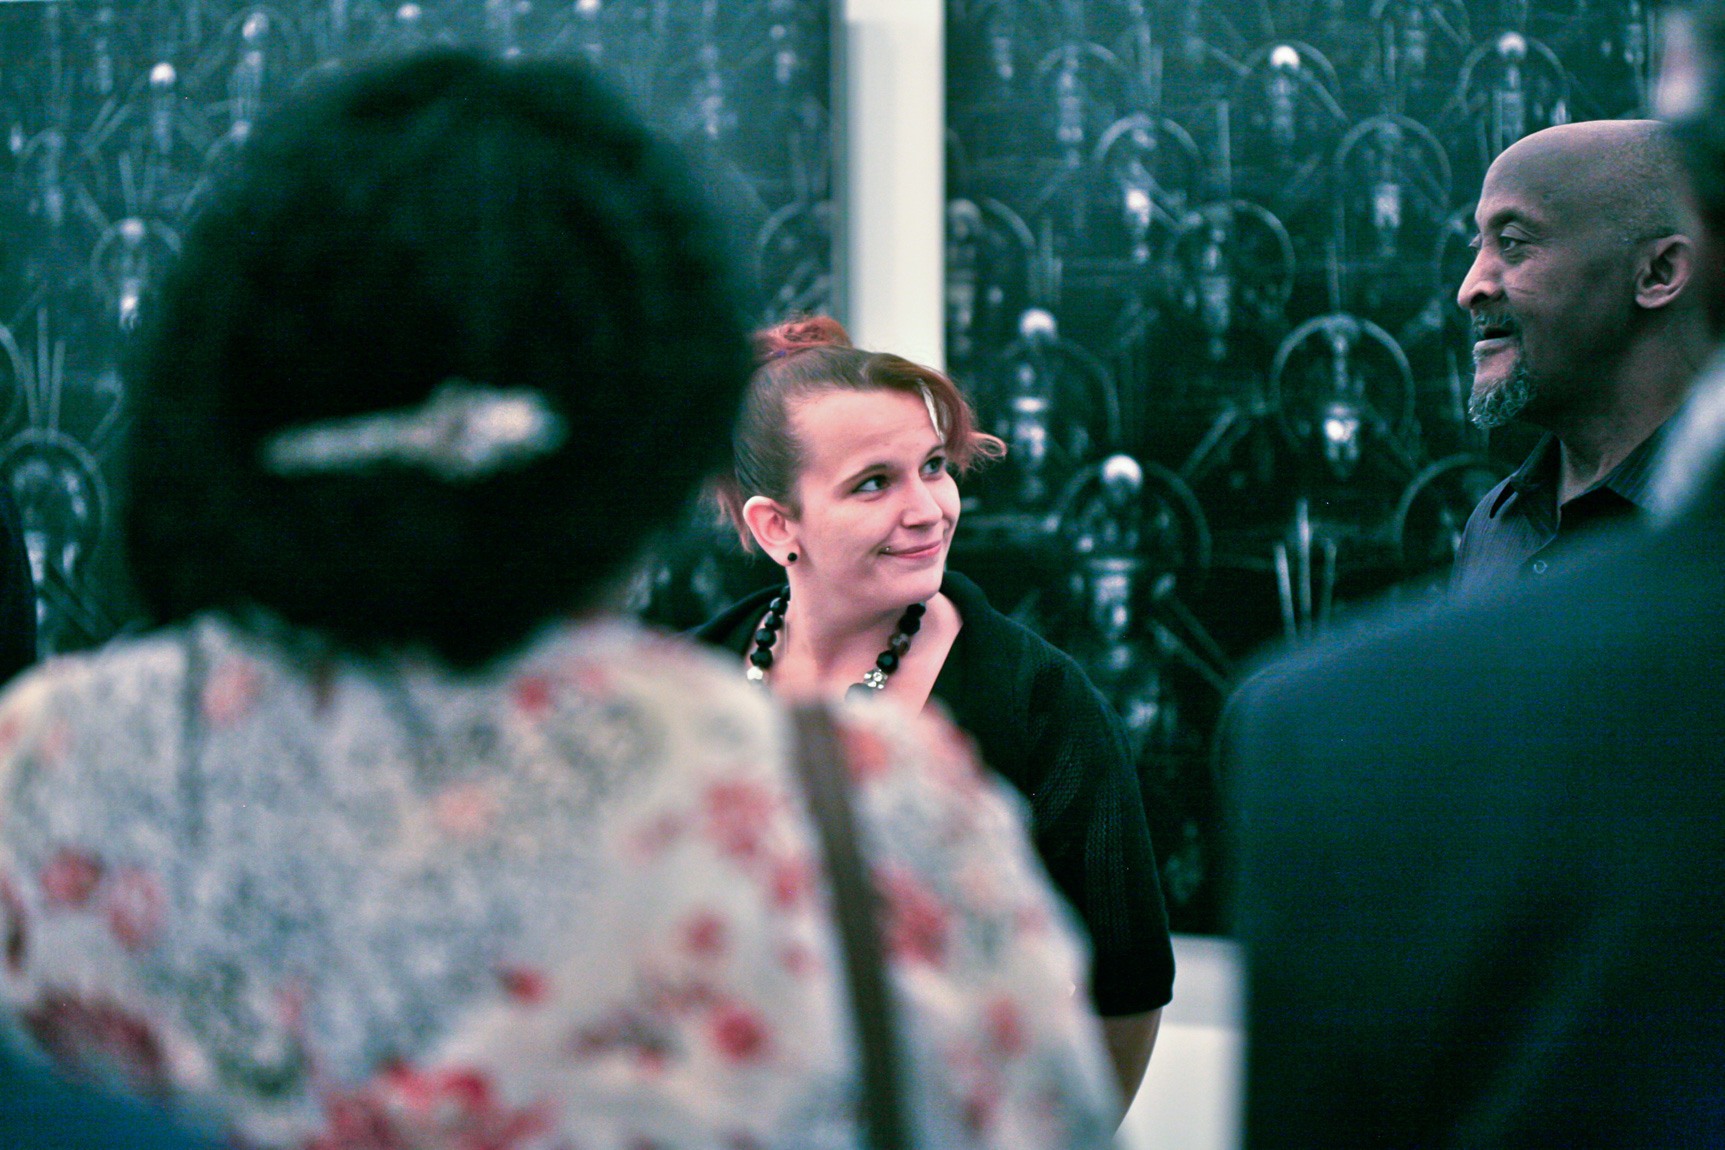 A guest smiles at one another during the event.